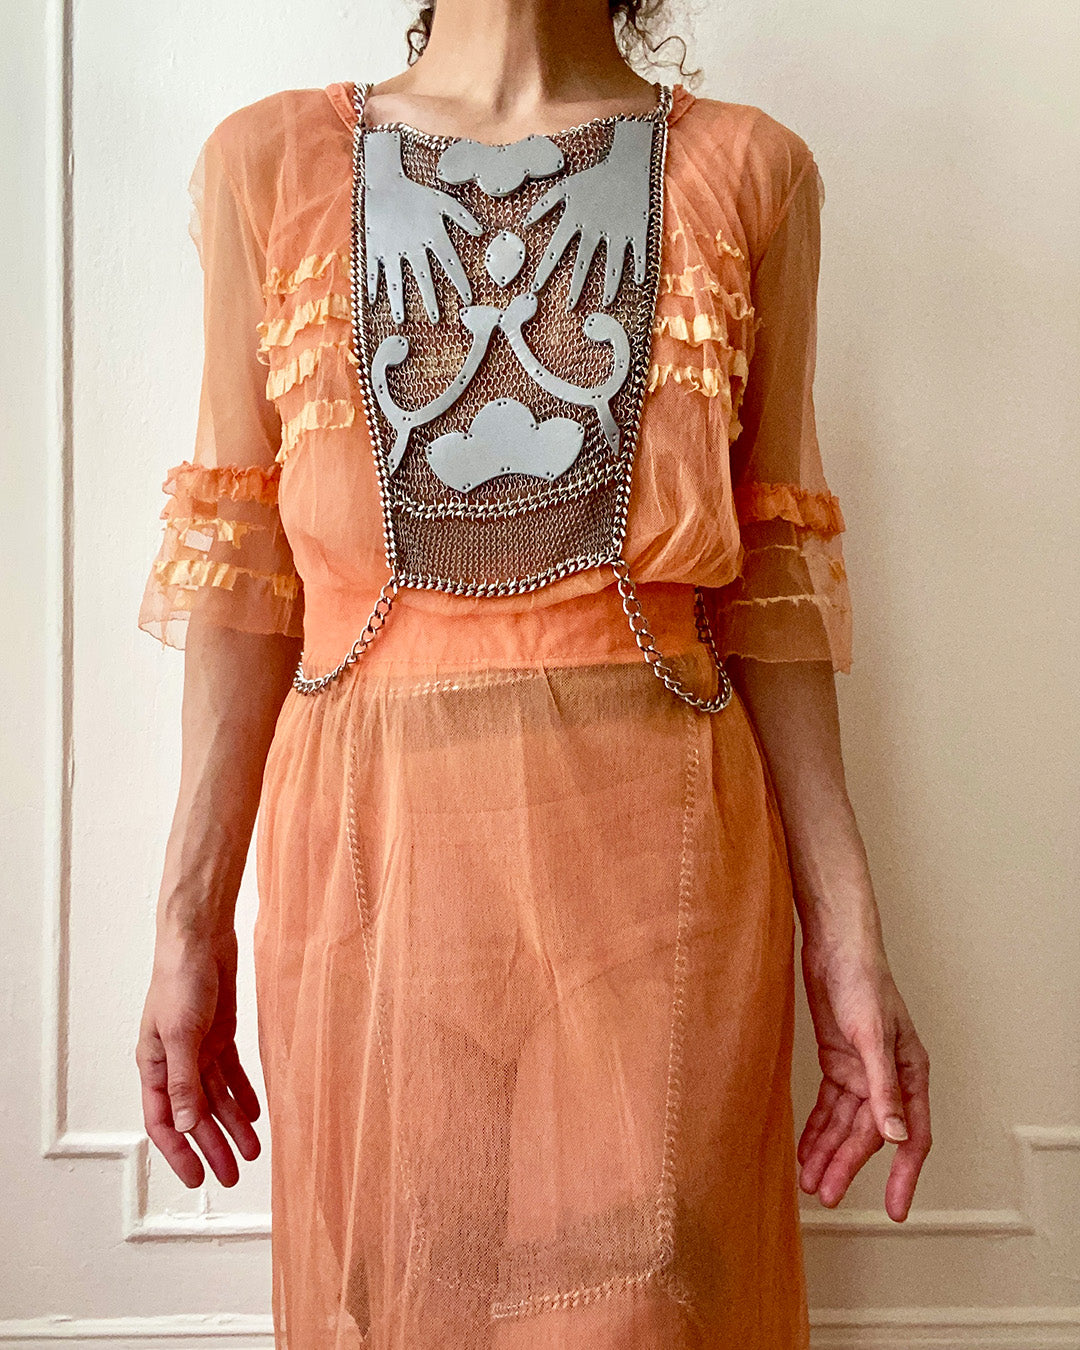 Falconiere Hand Maiden Apron - Leather Chainmail Vest - Made to Order in 3-6 weeks